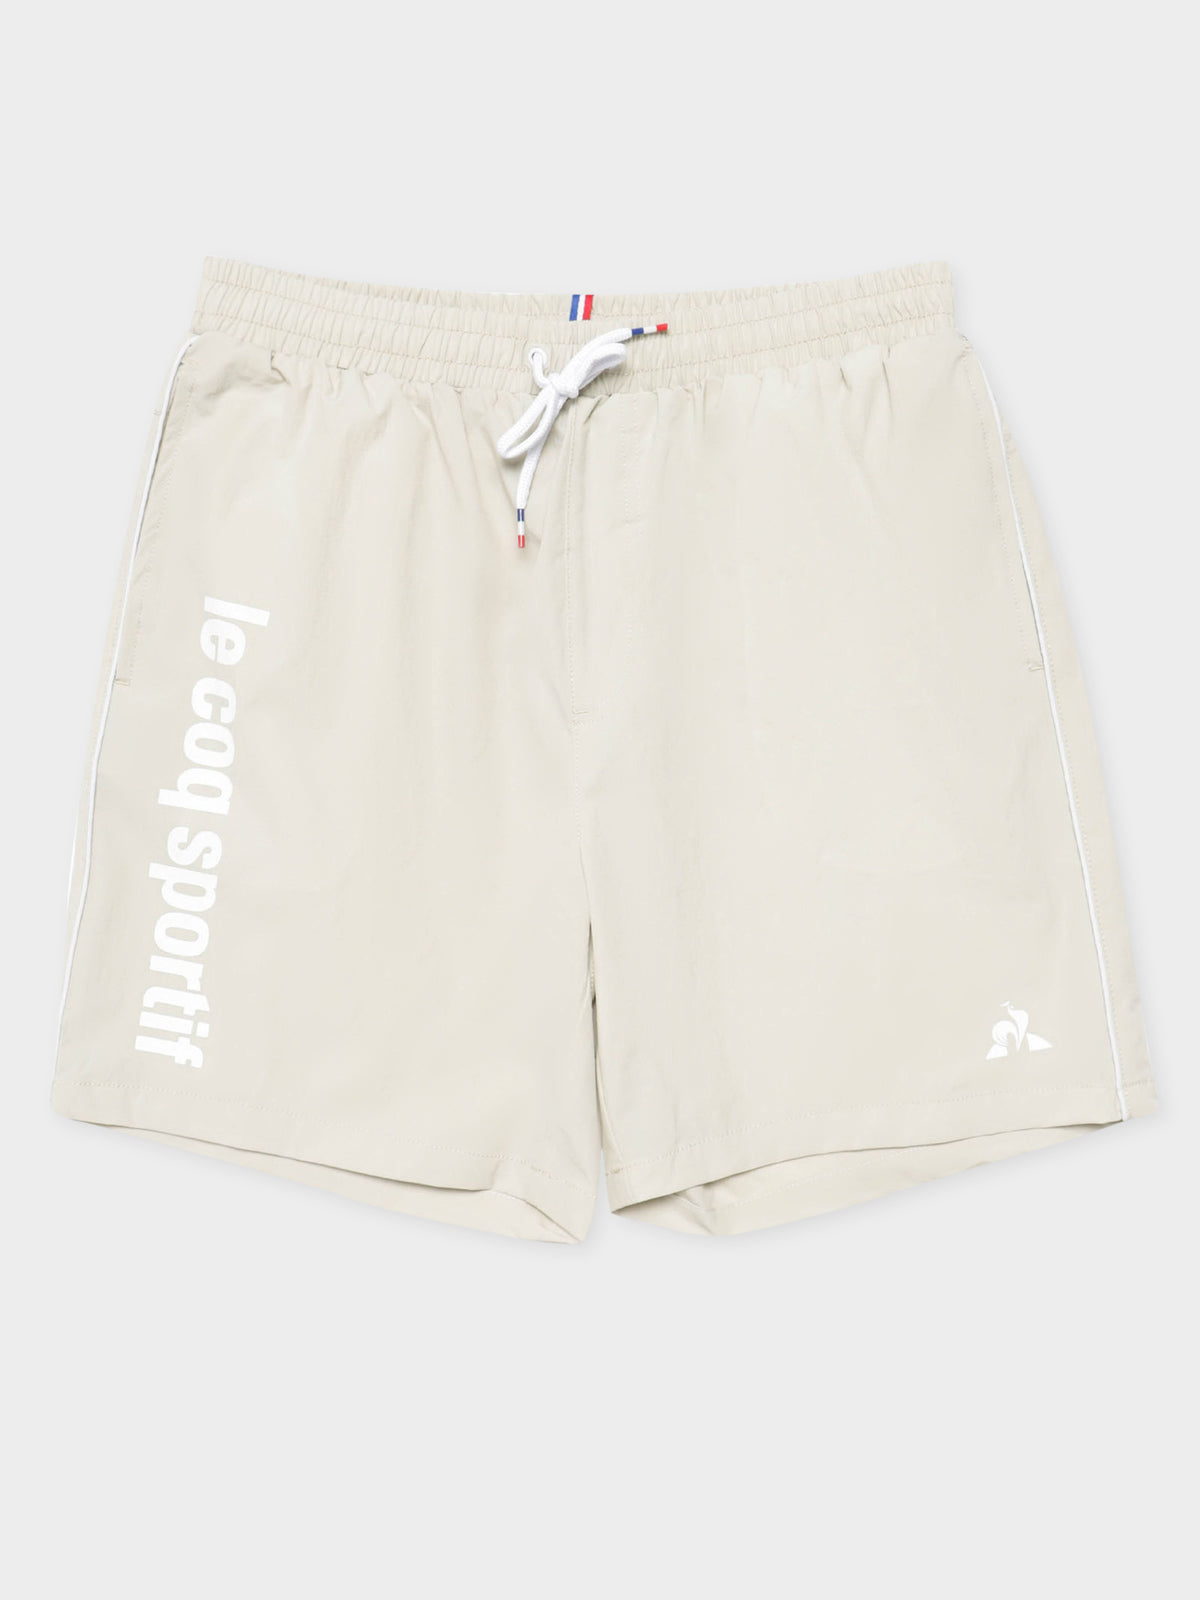 Concurrent Shorts in Oatmeal